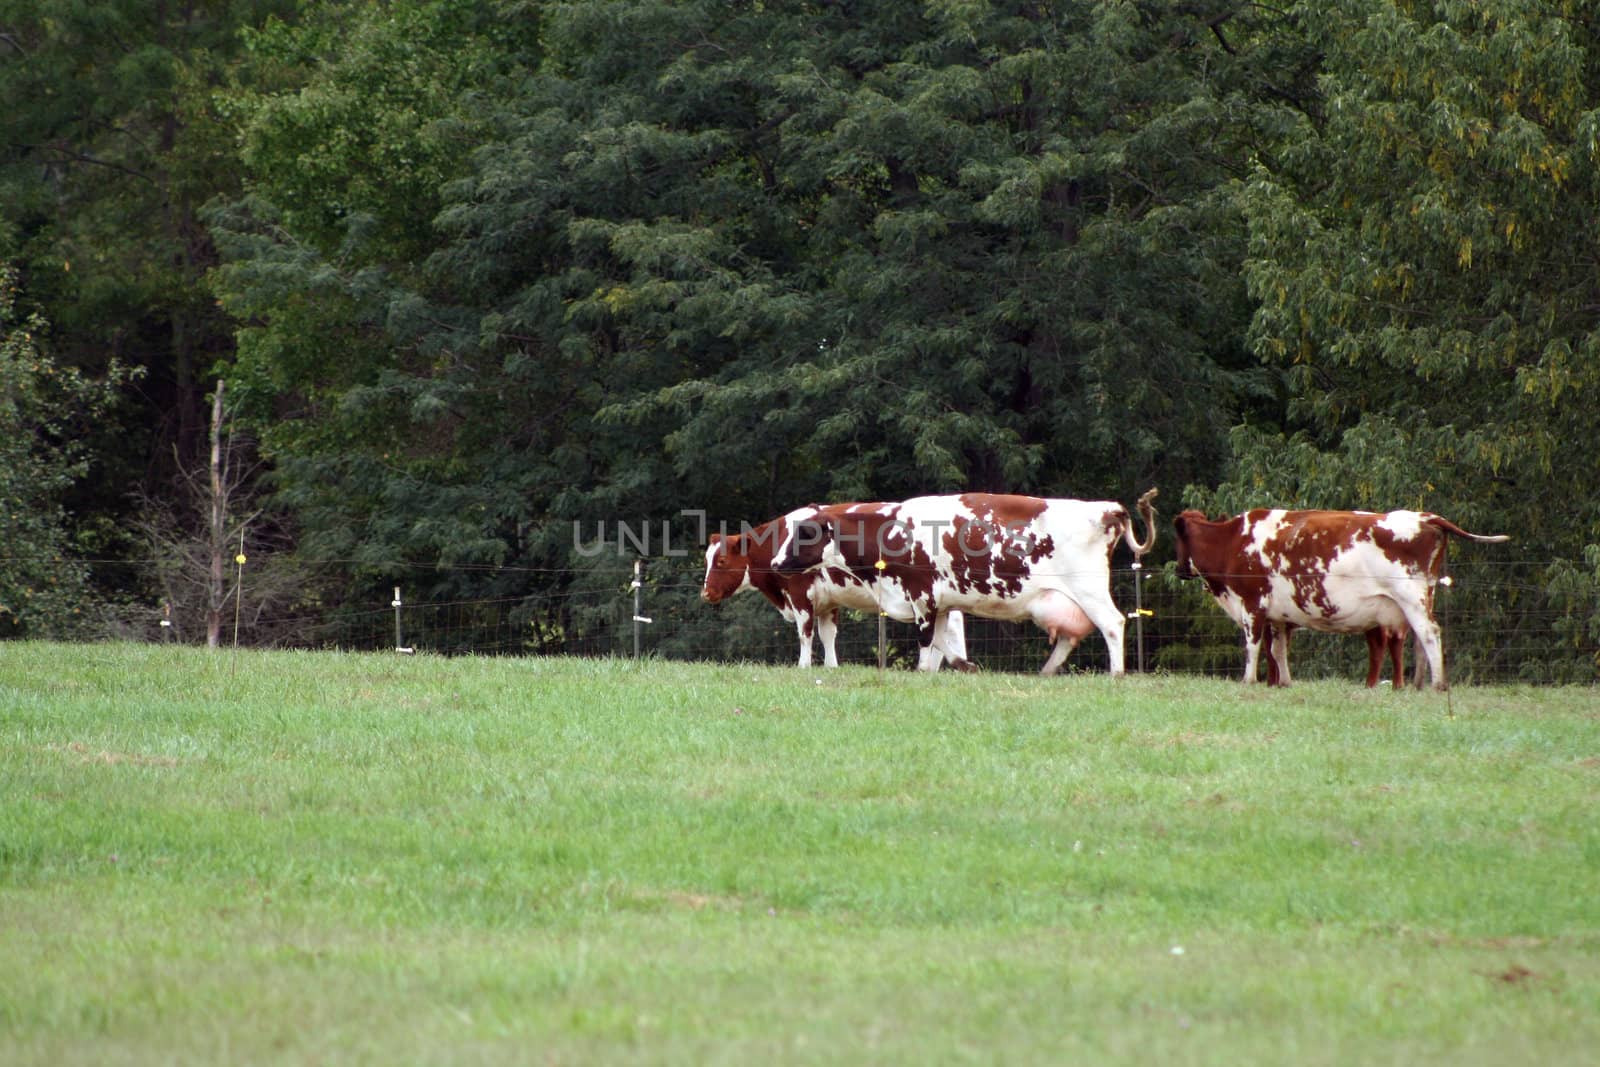 Three Cows in a field with trees